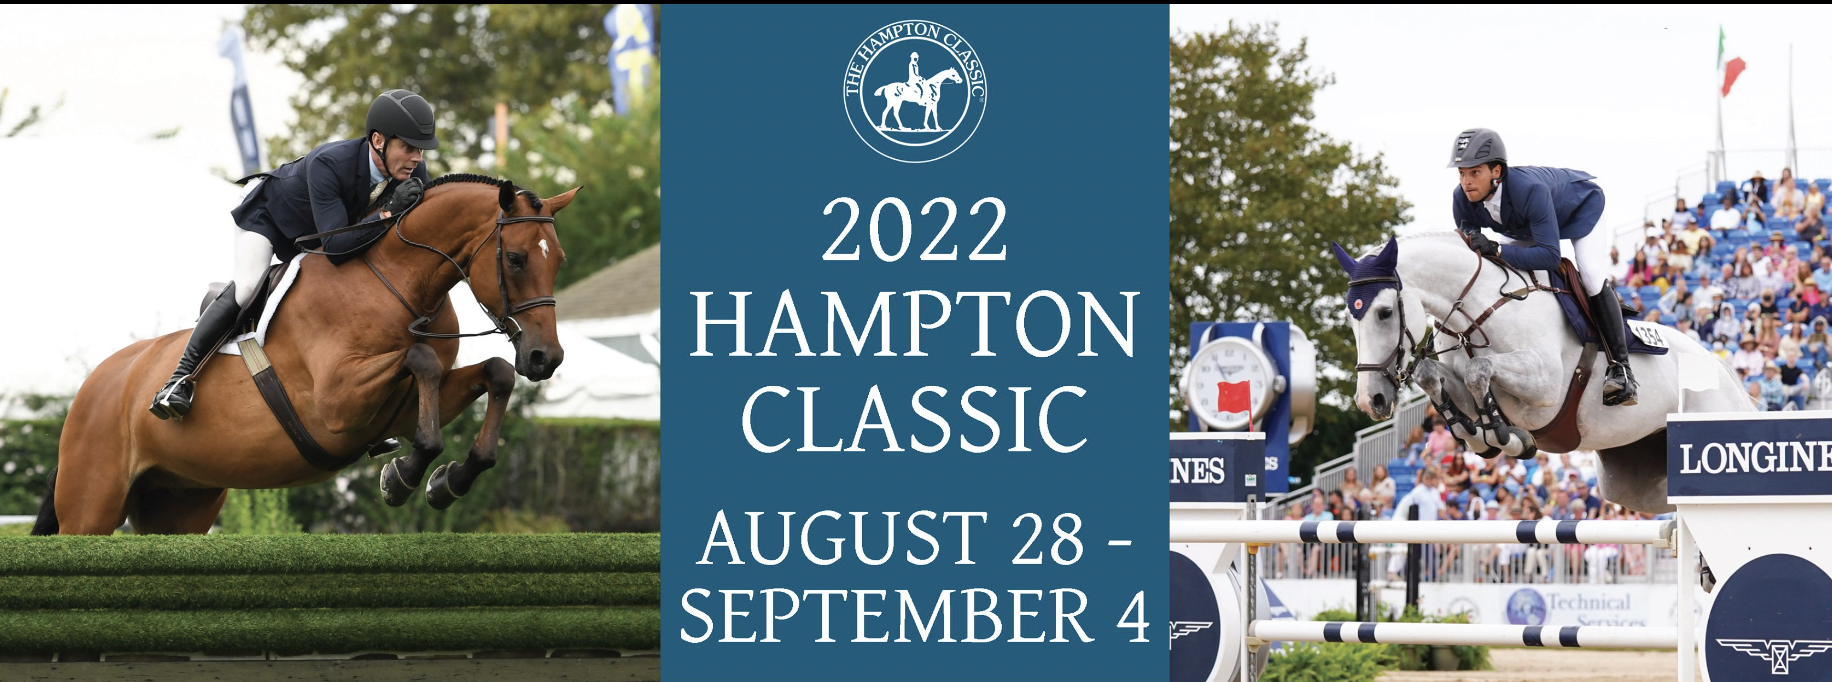 Celebrate Summers In New York At Hampton Classic Horse Show